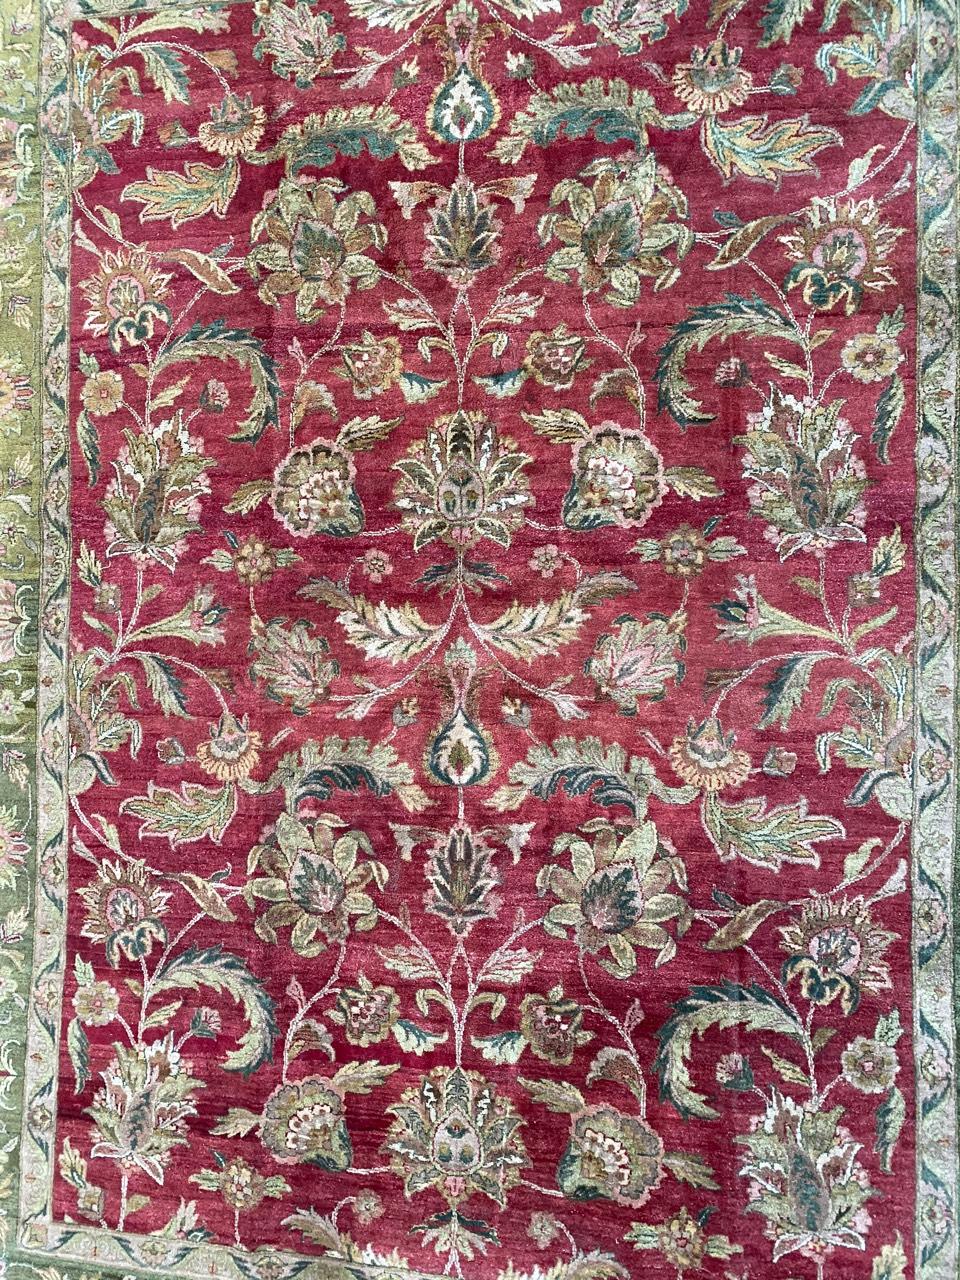 Exquisite large Indian Agra rug featuring a stunning decorative design and vibrant colors, including rich red and lush green. Meticulously hand-knotted with wool velvet on a cotton foundation. A true masterpiece for discerning decor